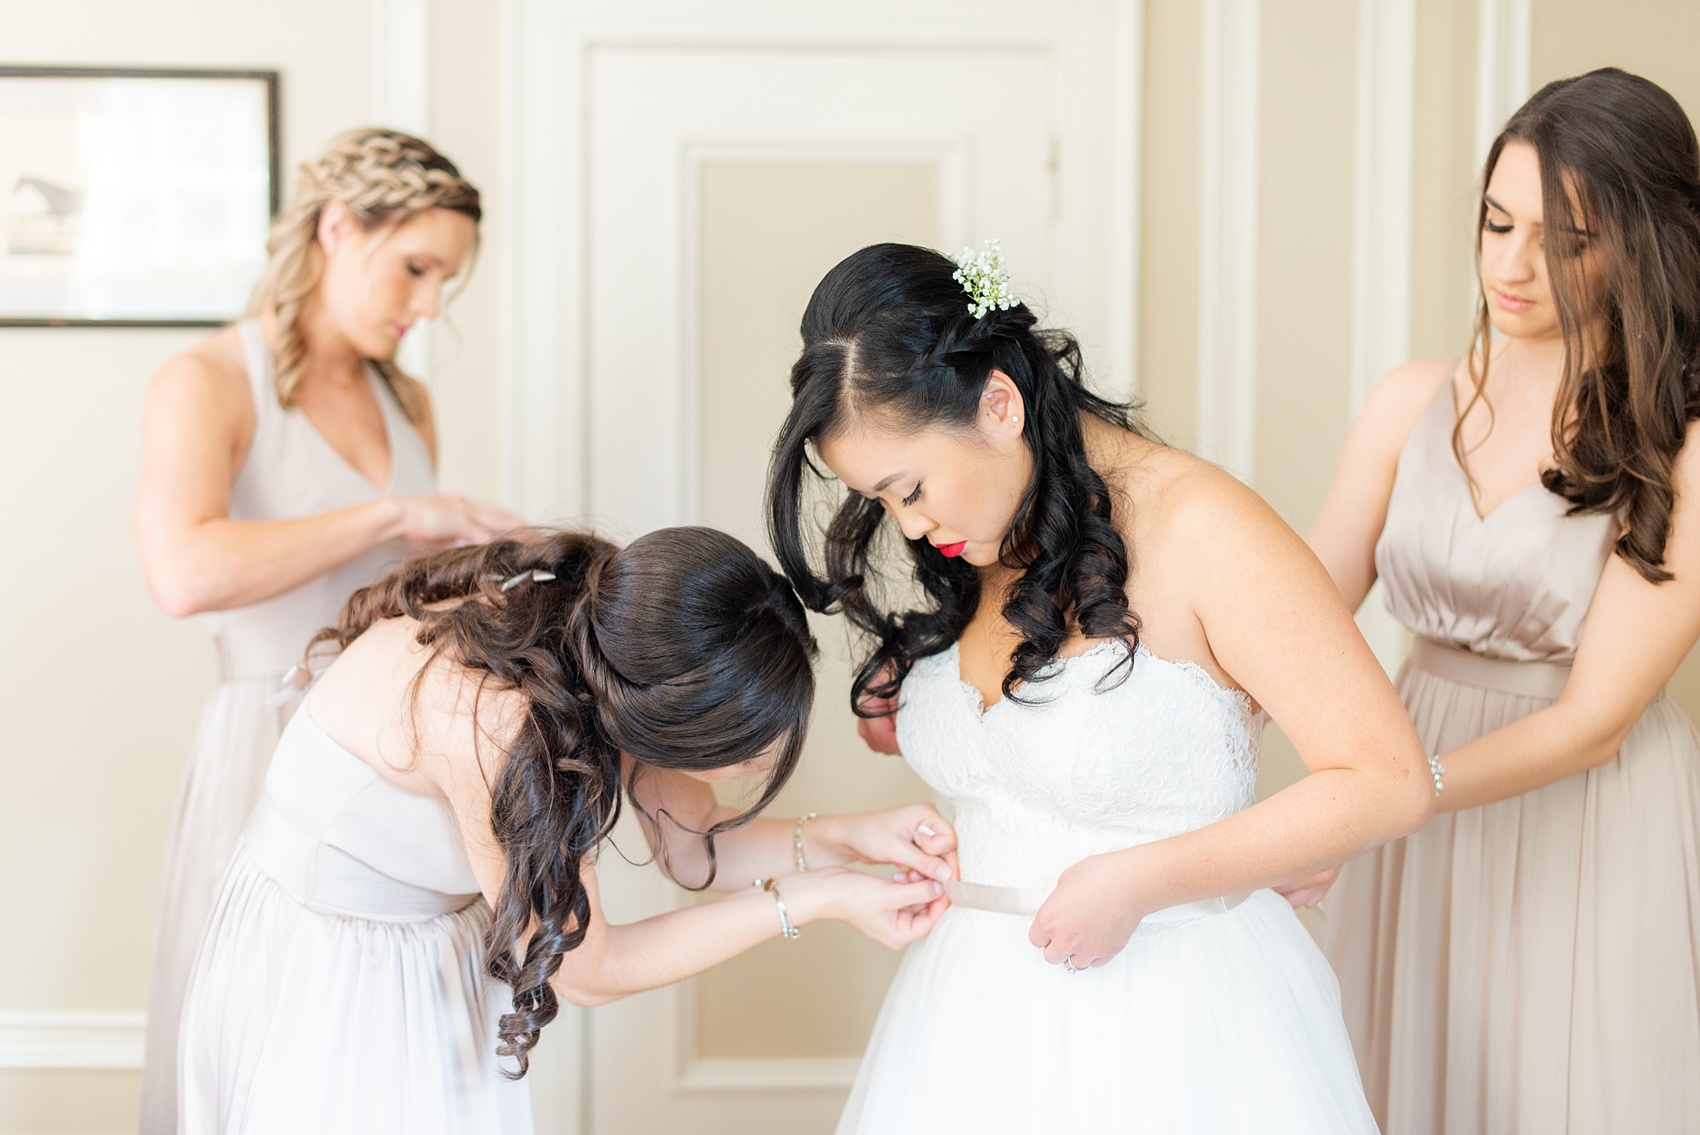 Getting ready wedding photos at Crabtree's Kittle House in Chappaqua, New York by Mikkel Paige Photography. This venue in Westchester county was the perfect place to capture the bride and bridesmaids getting ready in a country setting. The bride had timeless style with her strapless lace and tulle dress. Click through for more fall wedding inspiration from her day! #mikkelpaige #CrabtreesKittleHouse #WestchesterWeddingVenues #WestchesterWedding #SeptemberWedding #gettingready #bridestyle